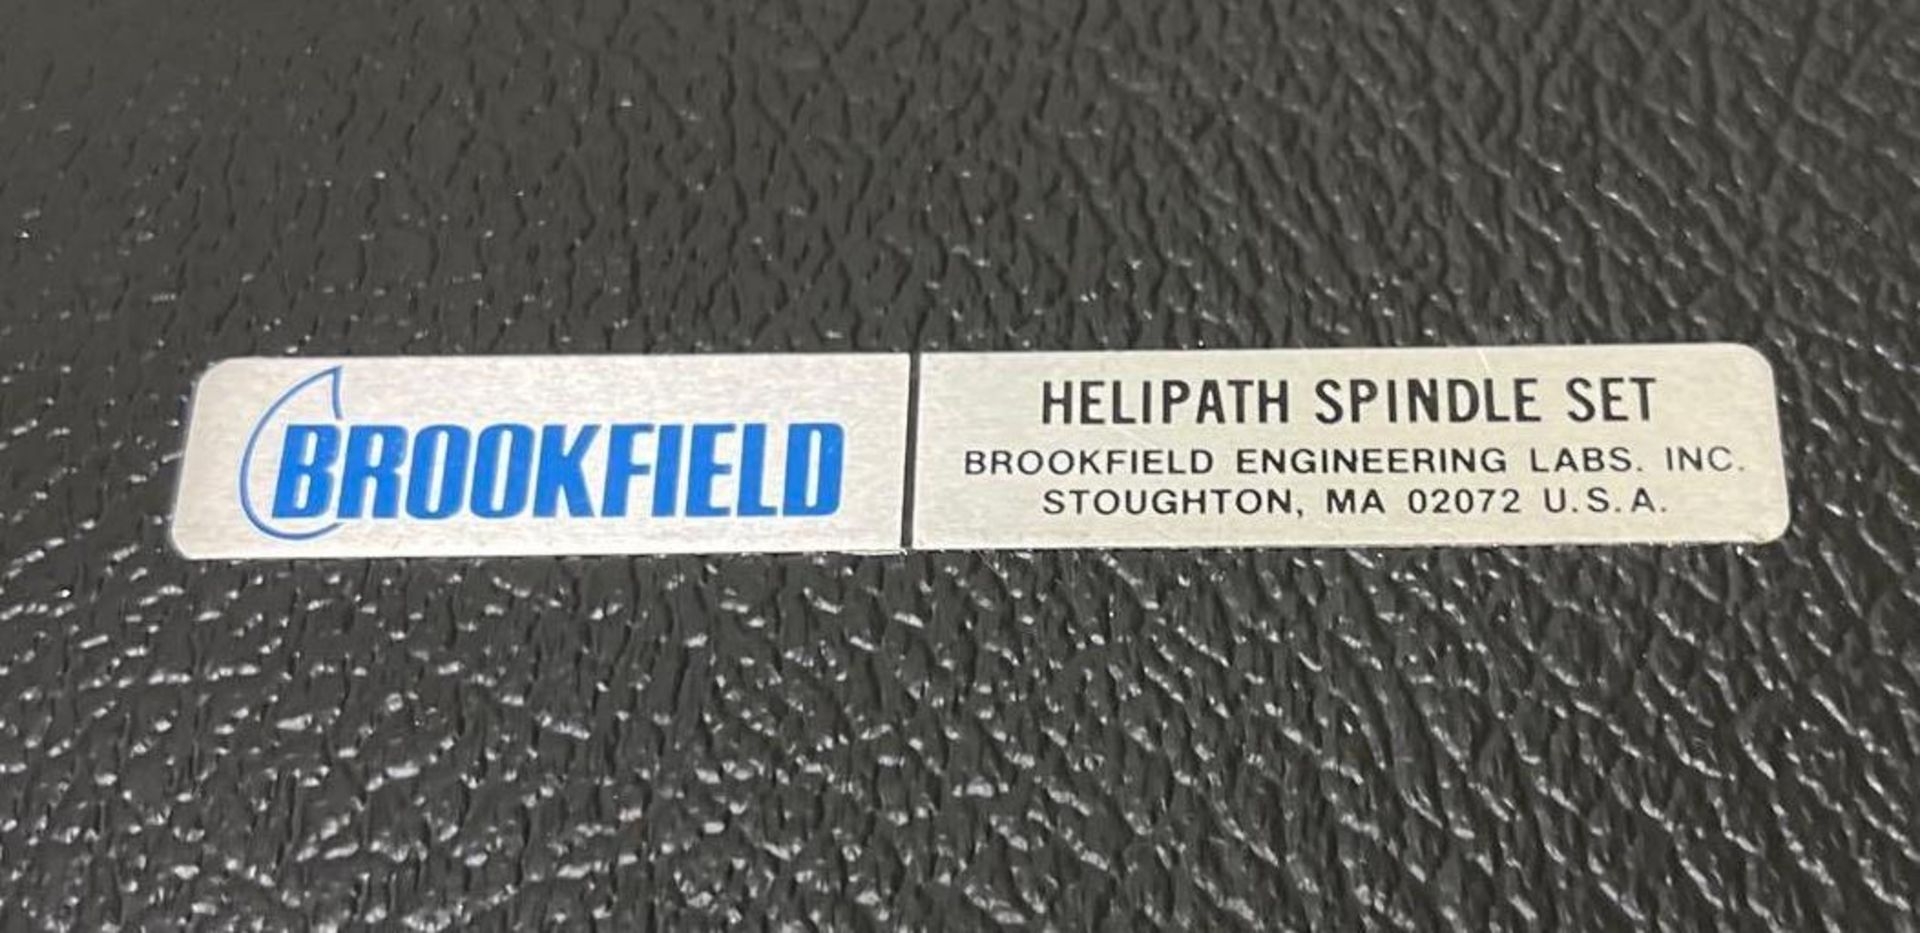 Lot of (2) Brookfield Helipath Spindle Sets - Image 4 of 4